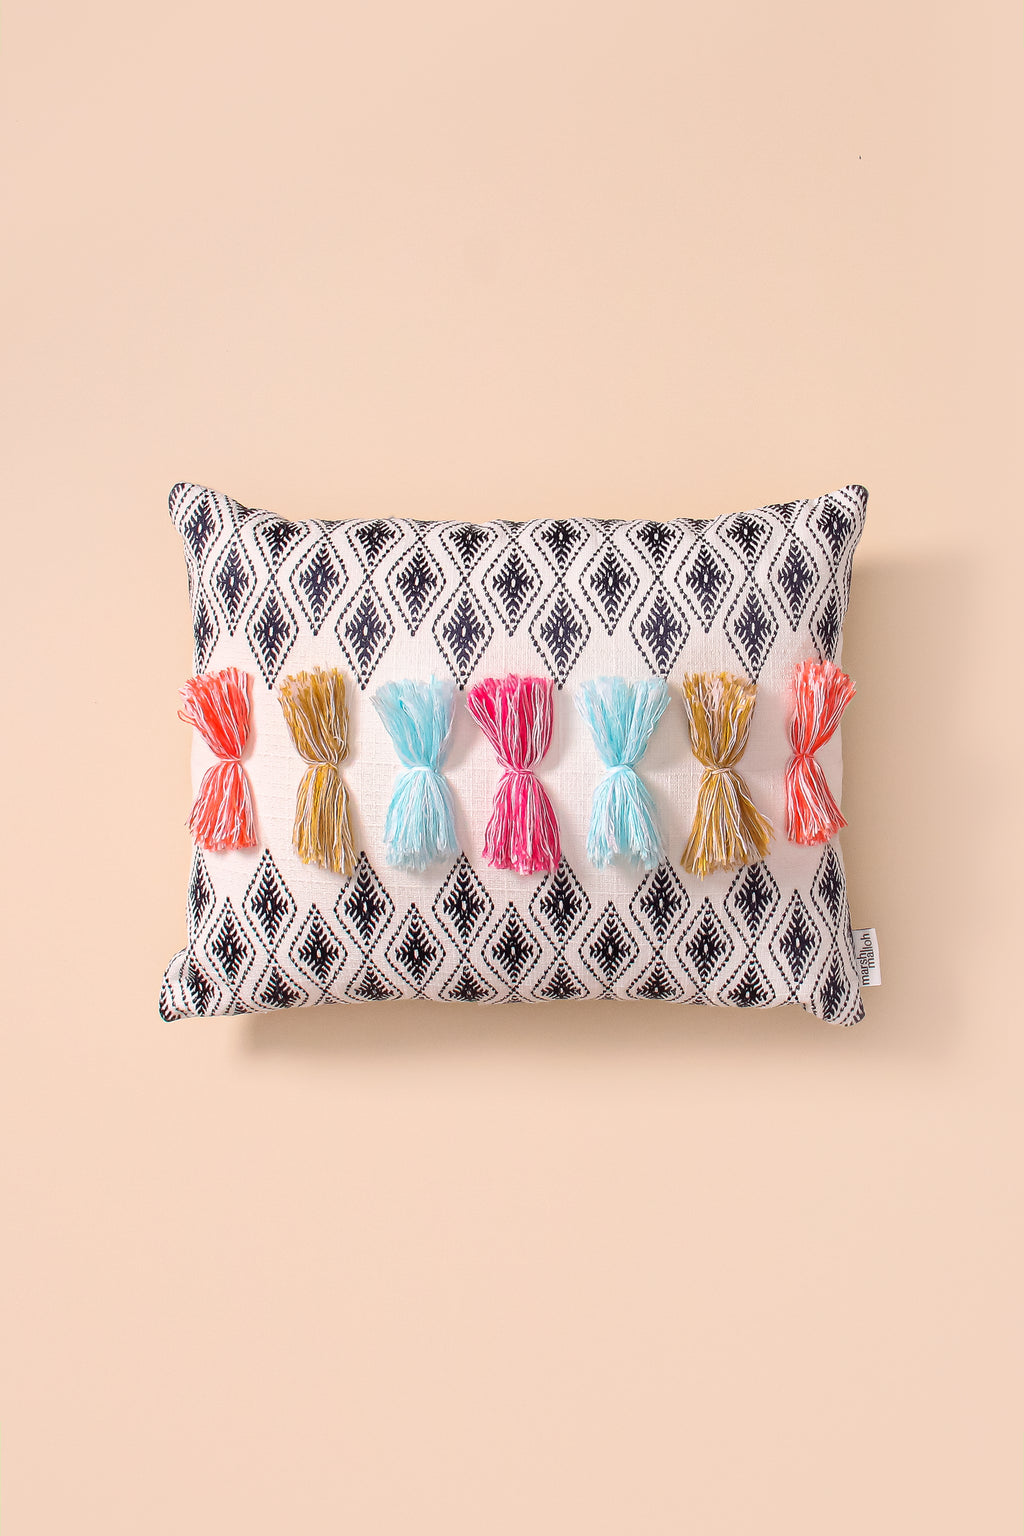 El Mar Pillow Collection: Multi-Color Stripes with Fish and Red Tassel –  Neroli Global